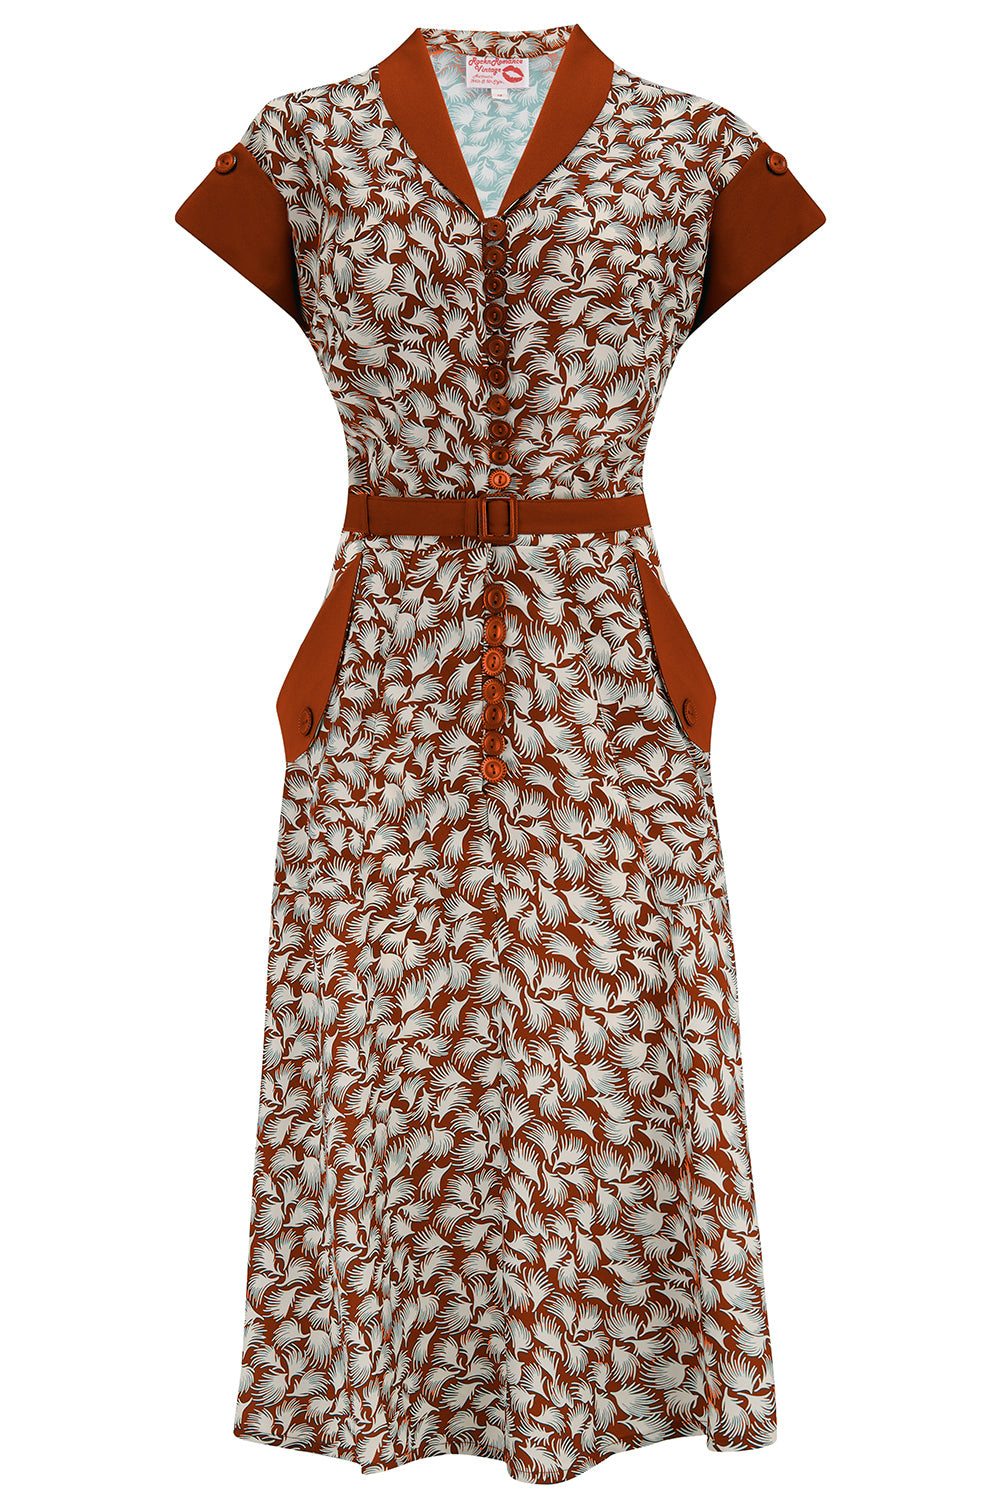 The "Casey" Dress in Cinnamon Whisp Print, True & Authentic 1950s Vintage Style product